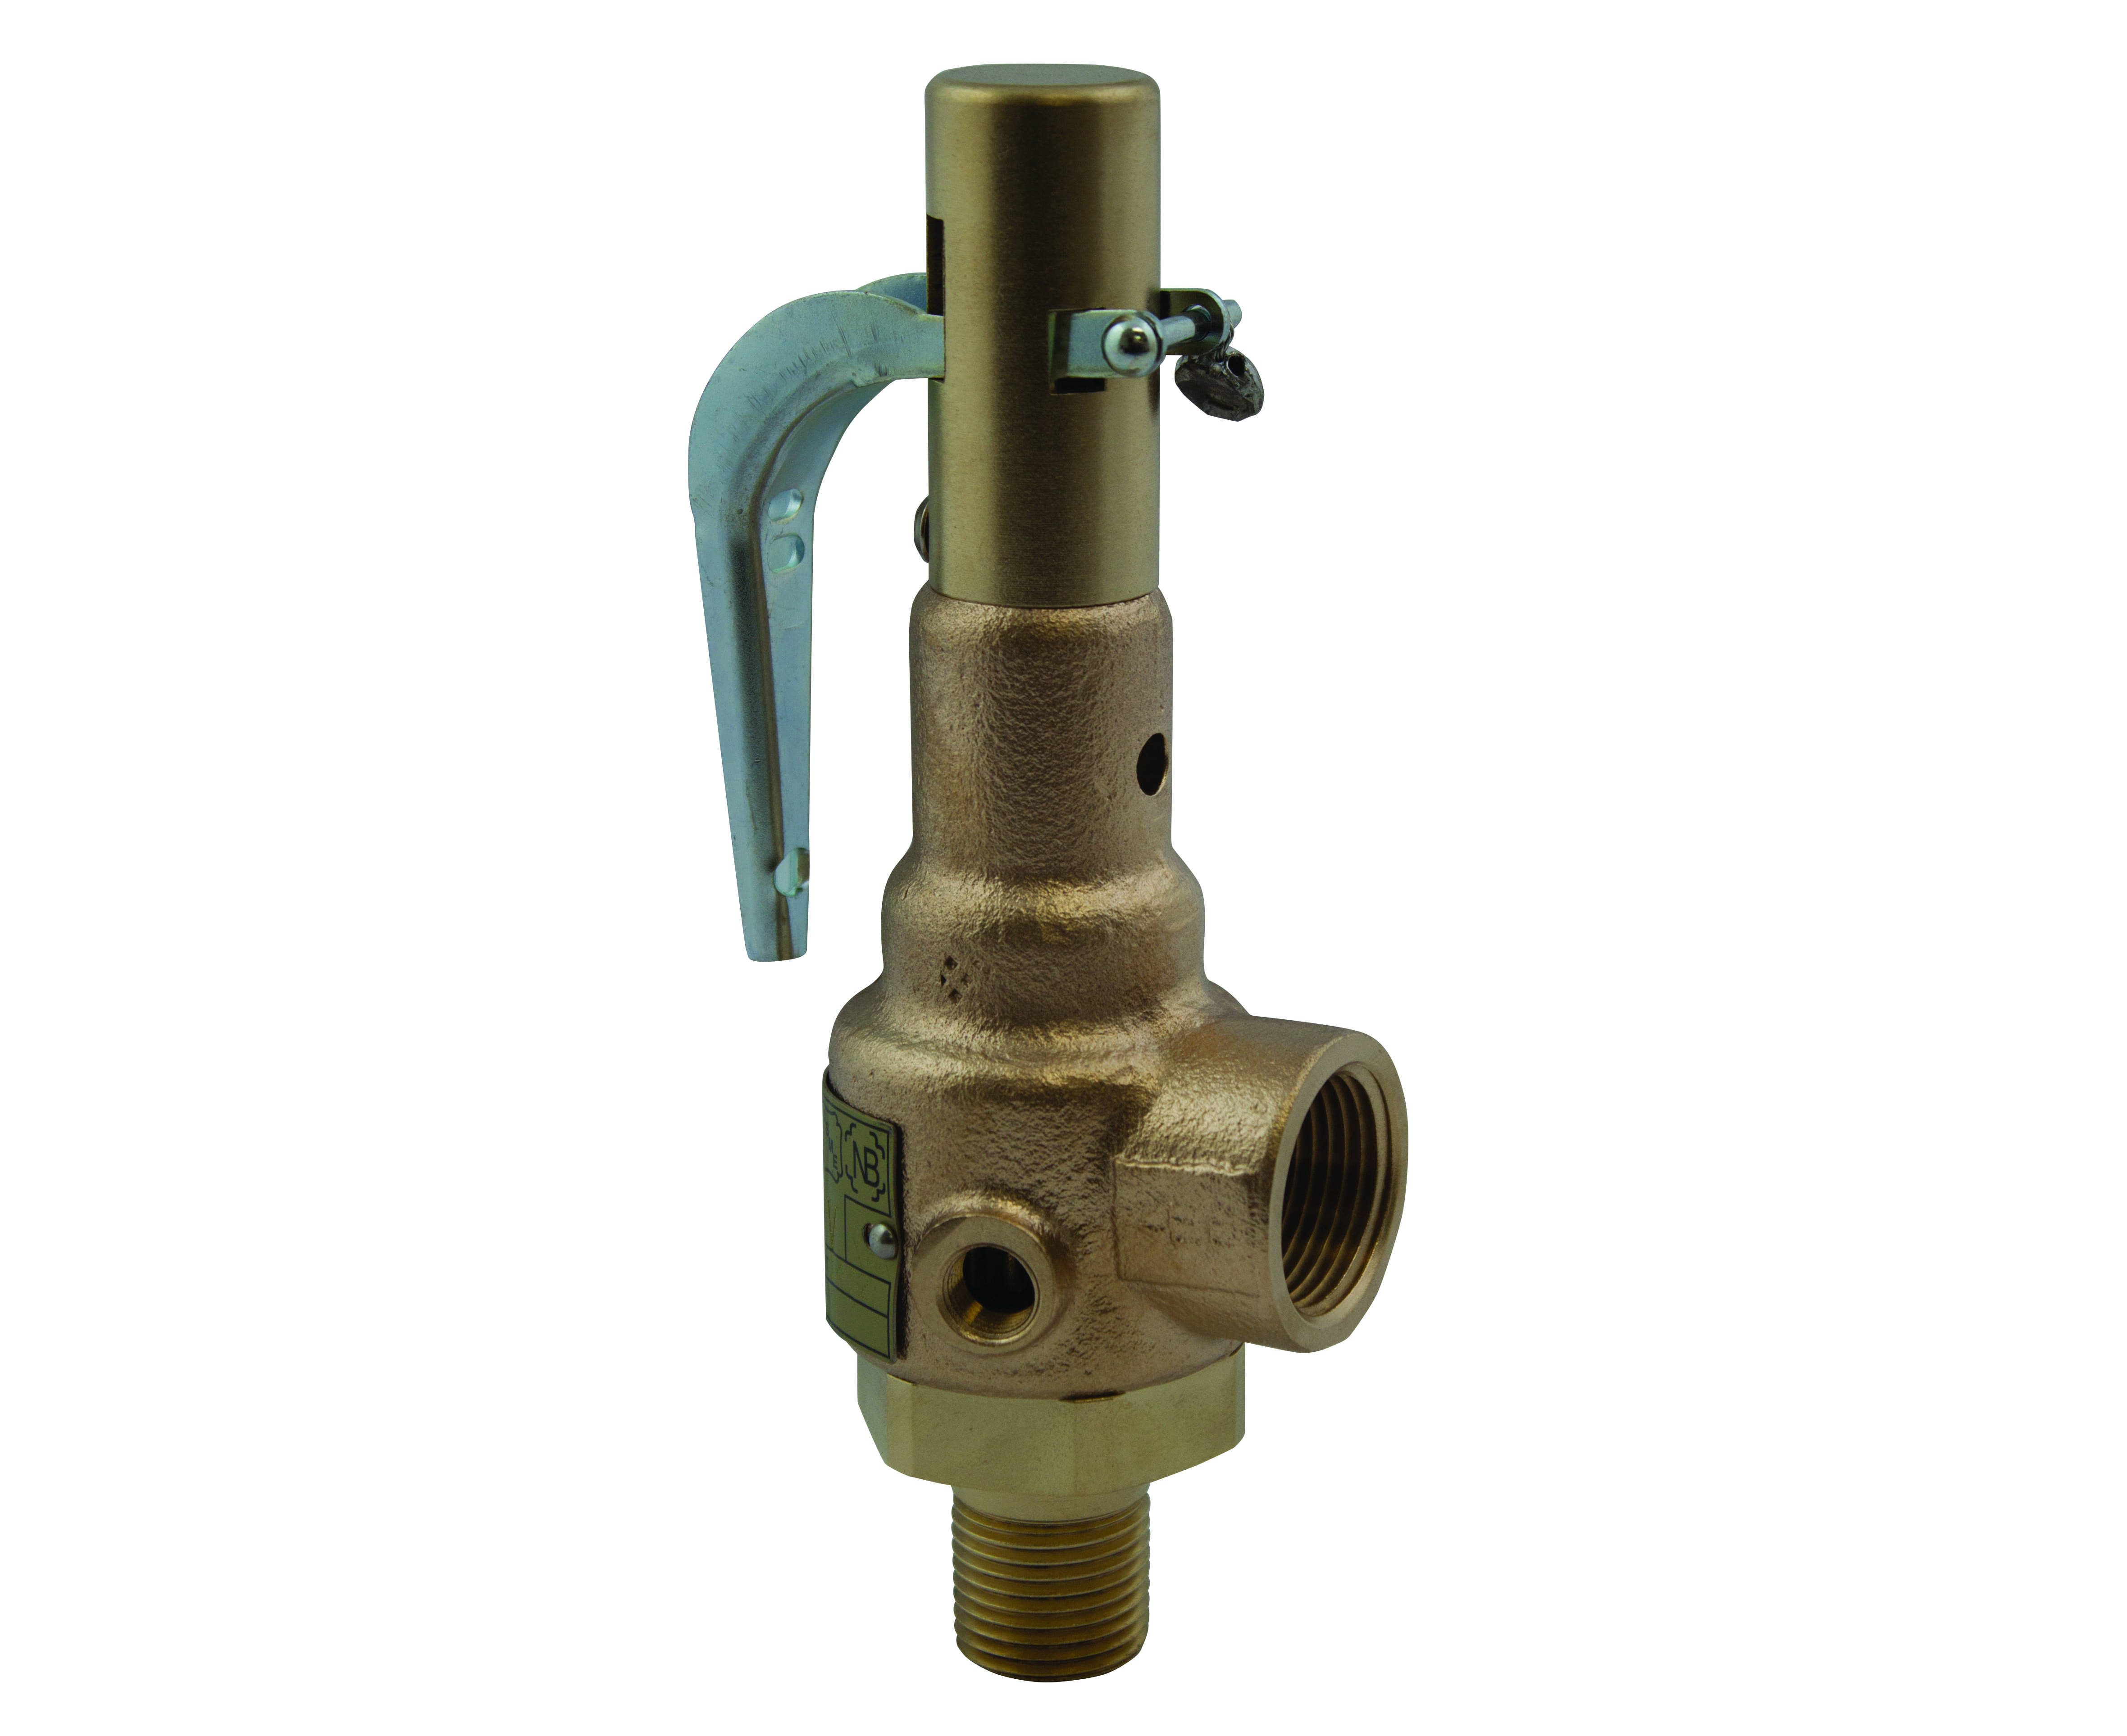 Preview image for Apollo ASME Sec I Steam Bronze Safety Relief Valves with Brass Trim, Teflon Seat, Performance Test Reports Included, SPL Tag, 1/2" x 3/4" (MNPT x FNPT)